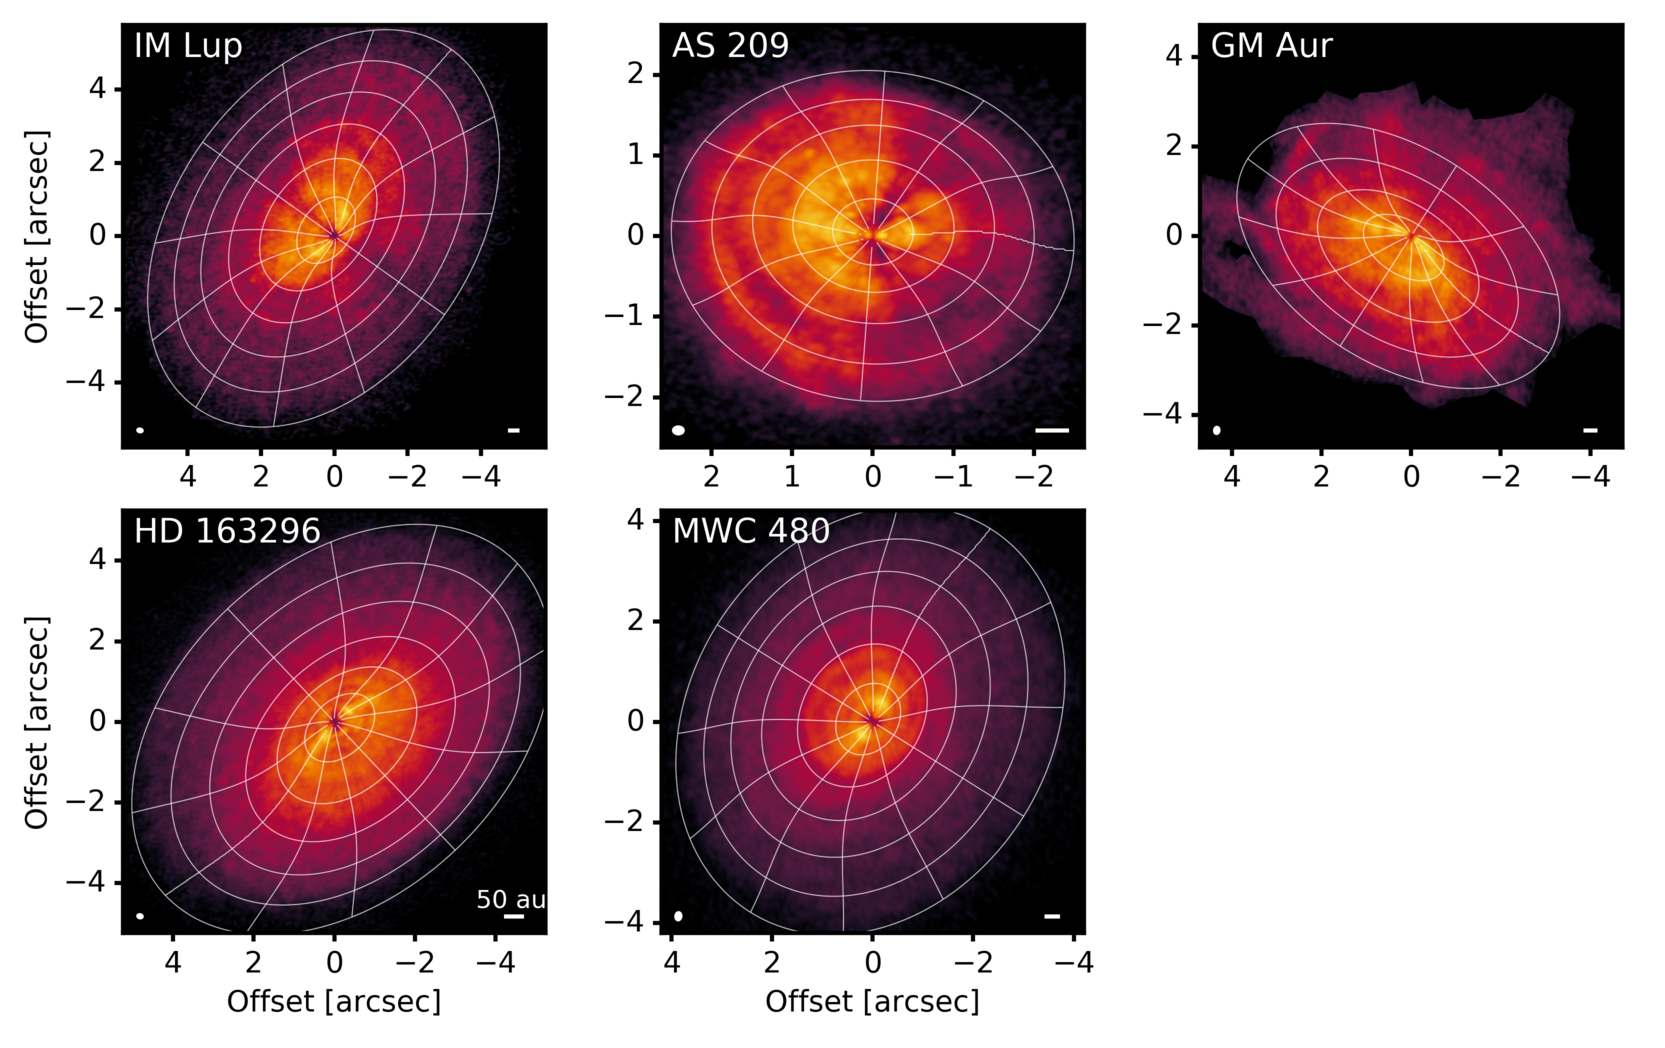 Contours showing the fitted line emission surfaces for <sup>12<sup/>CO J=2-1 that are overlaid on the corresponding peak intensity maps for each MAPS protoplanetary disk.